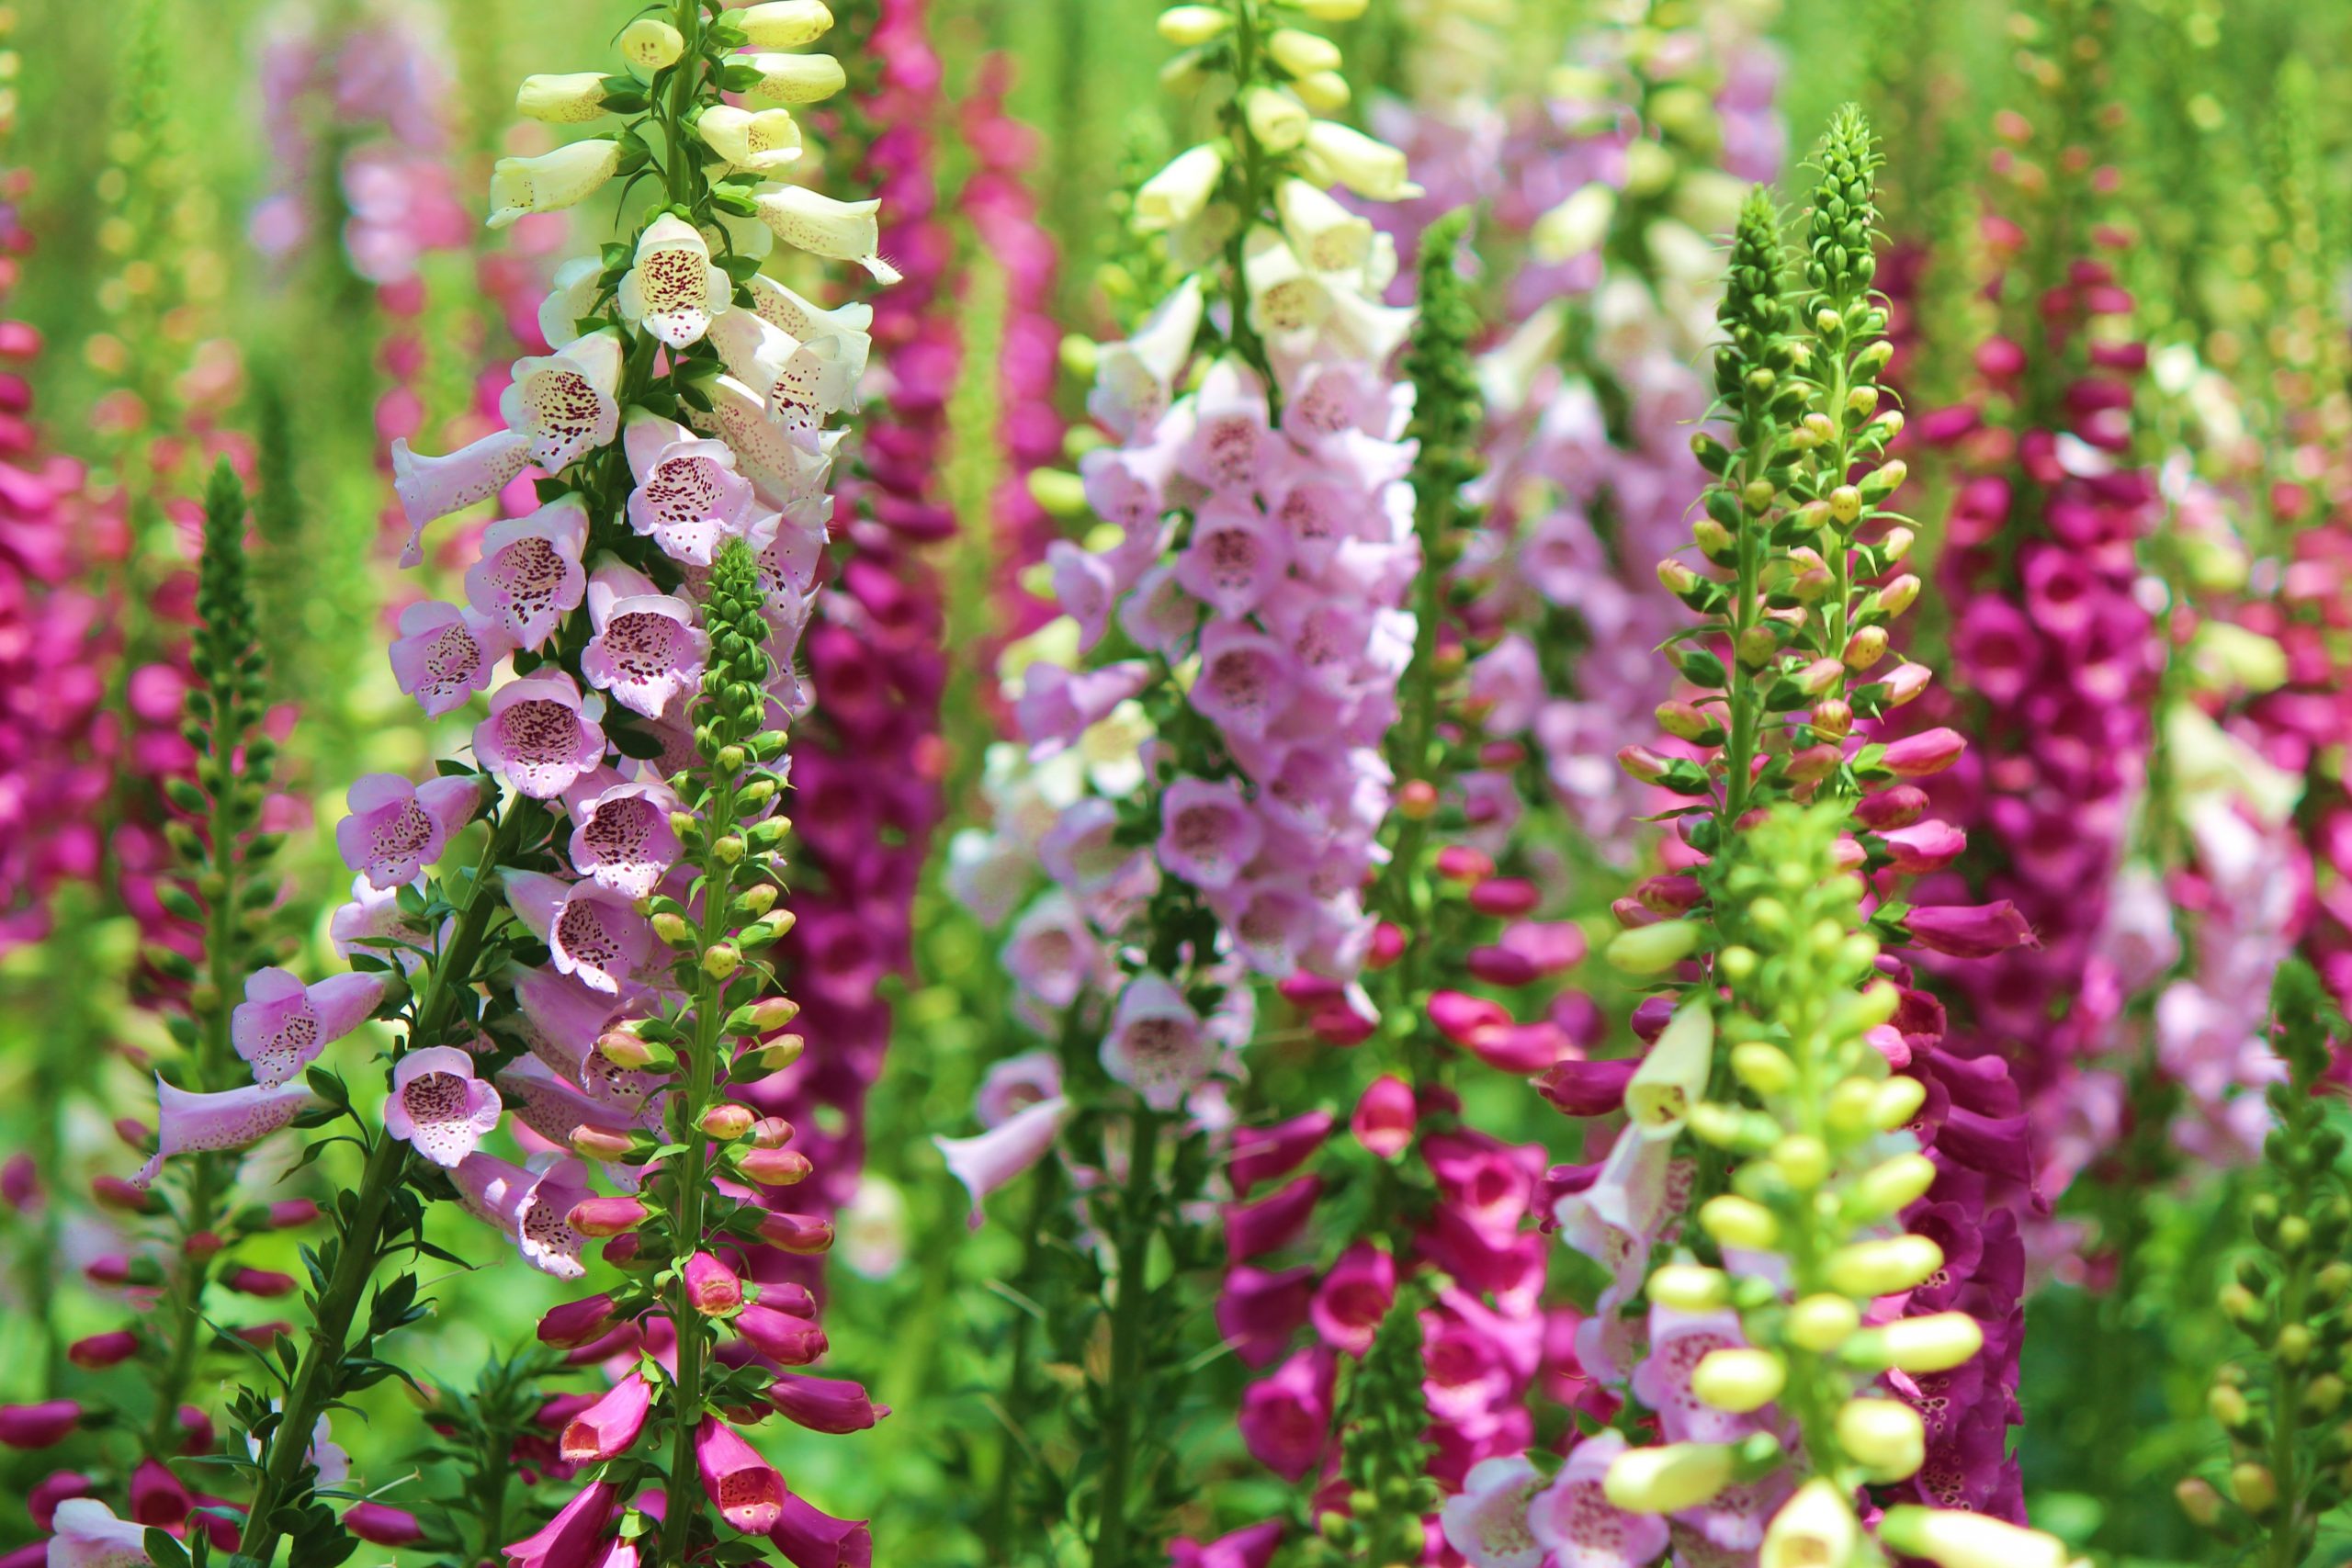 Are Foxgloves Poisonous? Can You Touch Them?